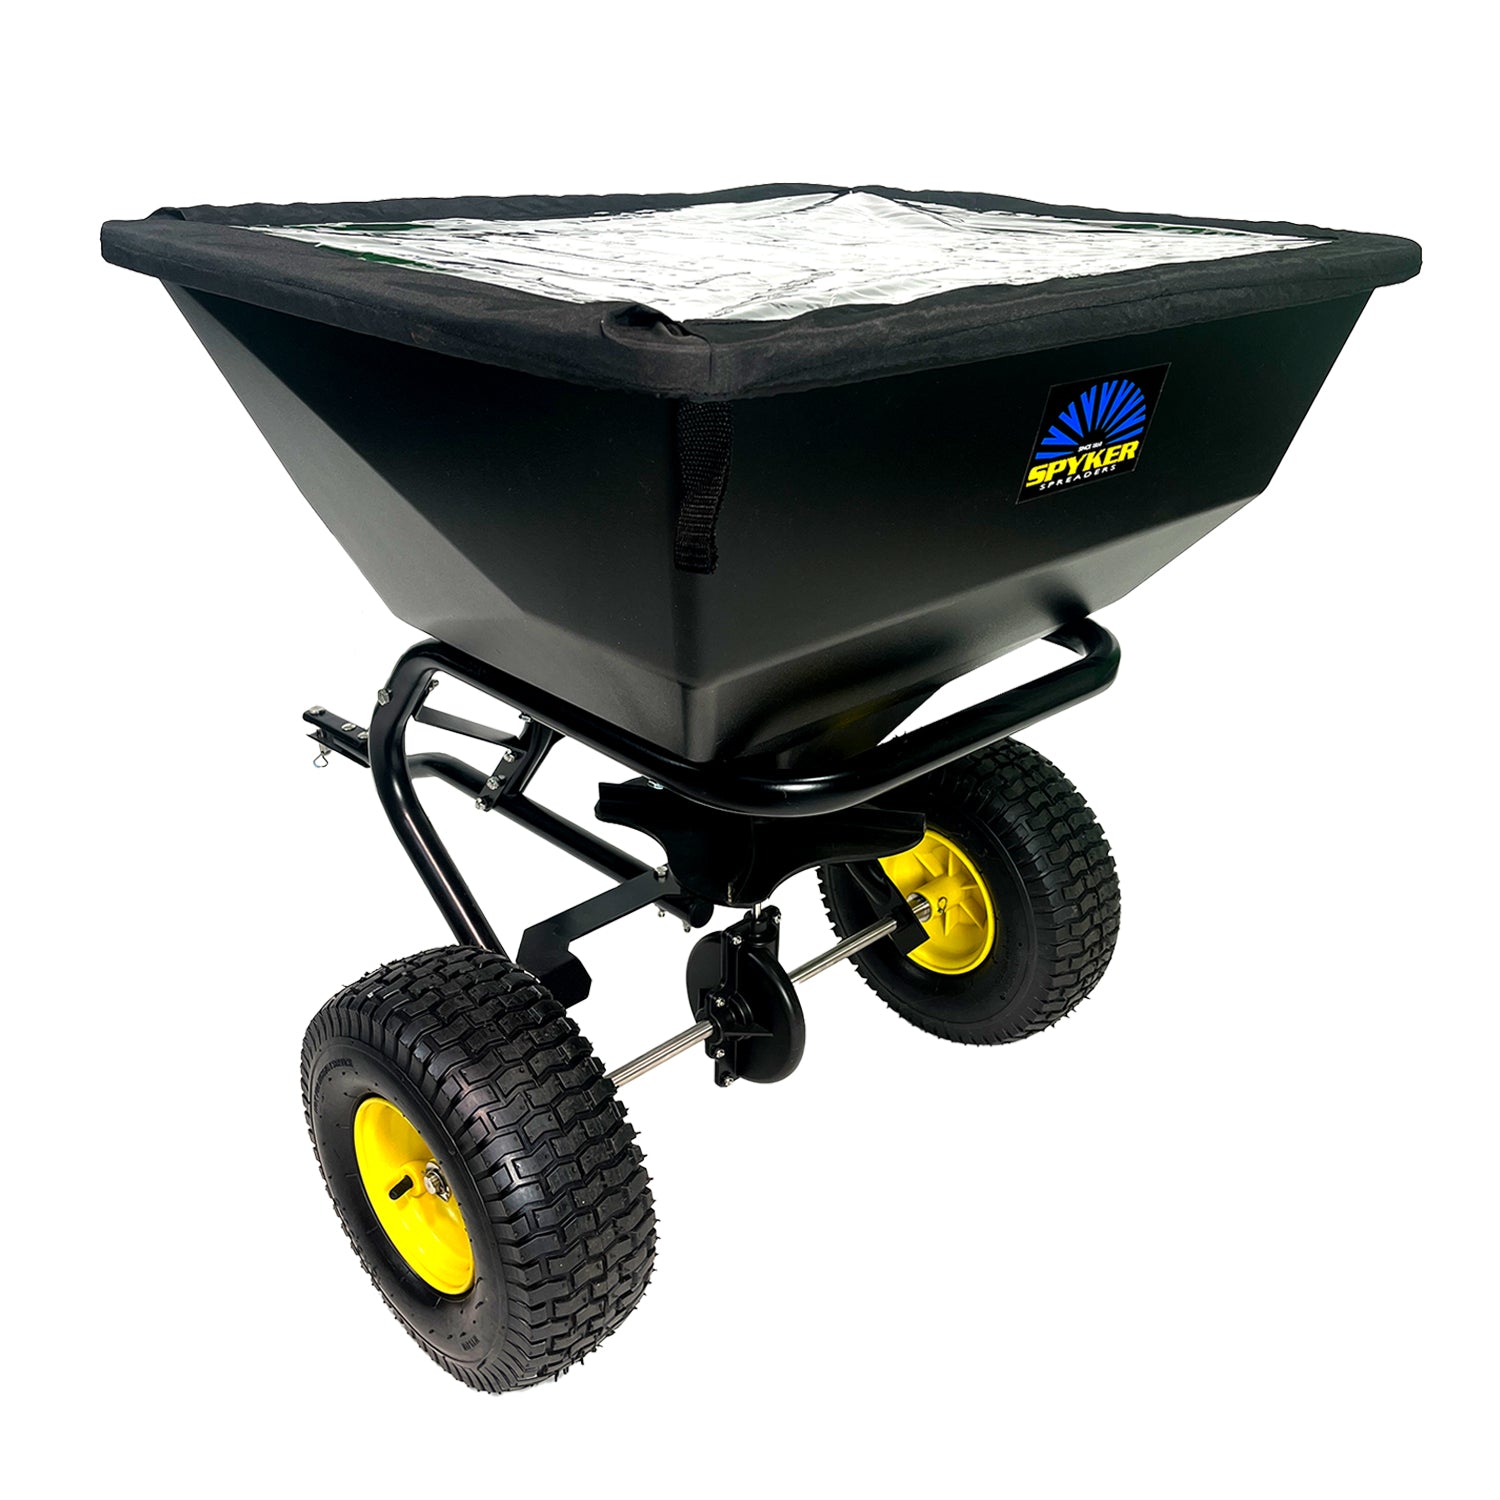 PRO-SERIES SPY200T-1P 200LB TOW BEHIND BROADCAST SPREADER